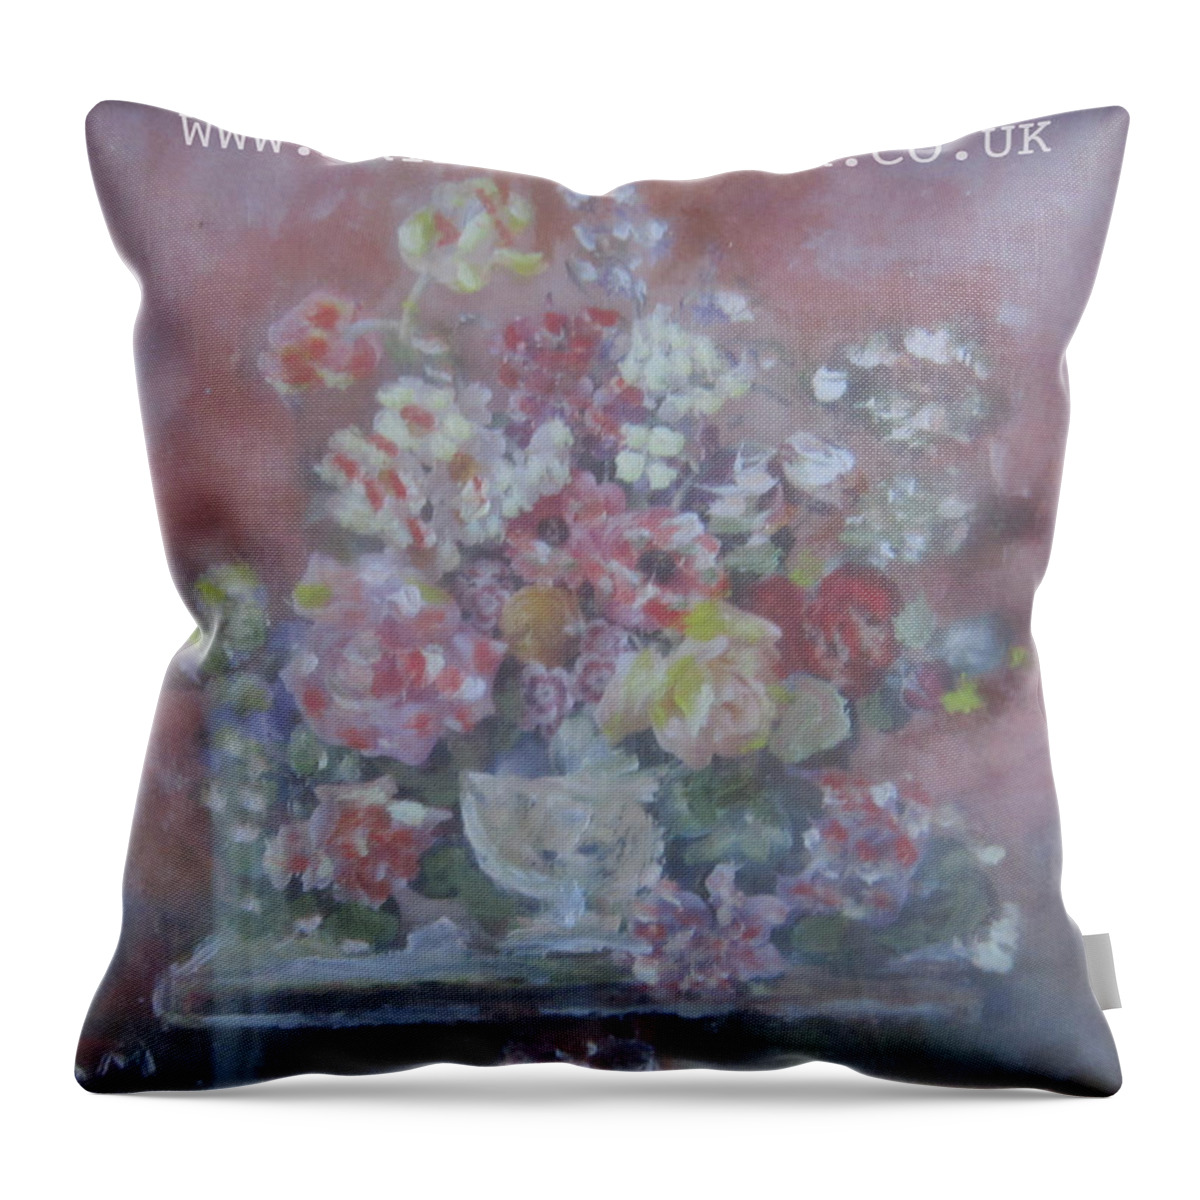 Bouquet Of Flowers Throw Pillow featuring the painting Bouquet of flowers by Sam Shaker